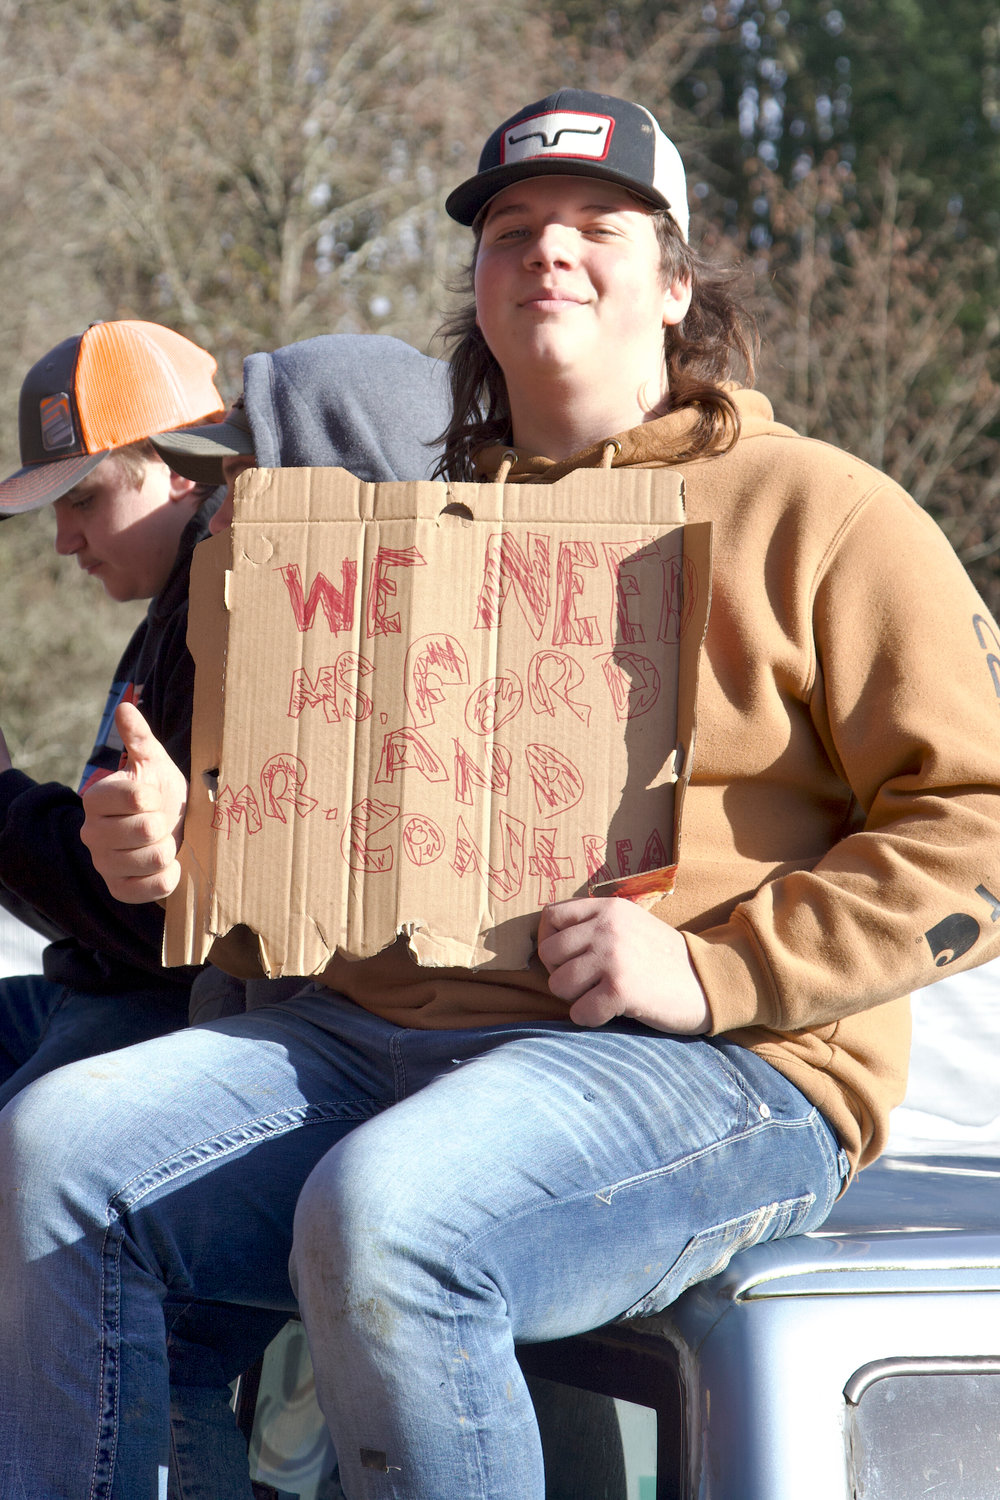 A Winlock student gives a thumbs up while holding a sign reading “We Need Ms. Ford and Mr. Contreras” during a protest against the Winlock School District’s plans to lay off two school counselors in Winlock on Wednesday.